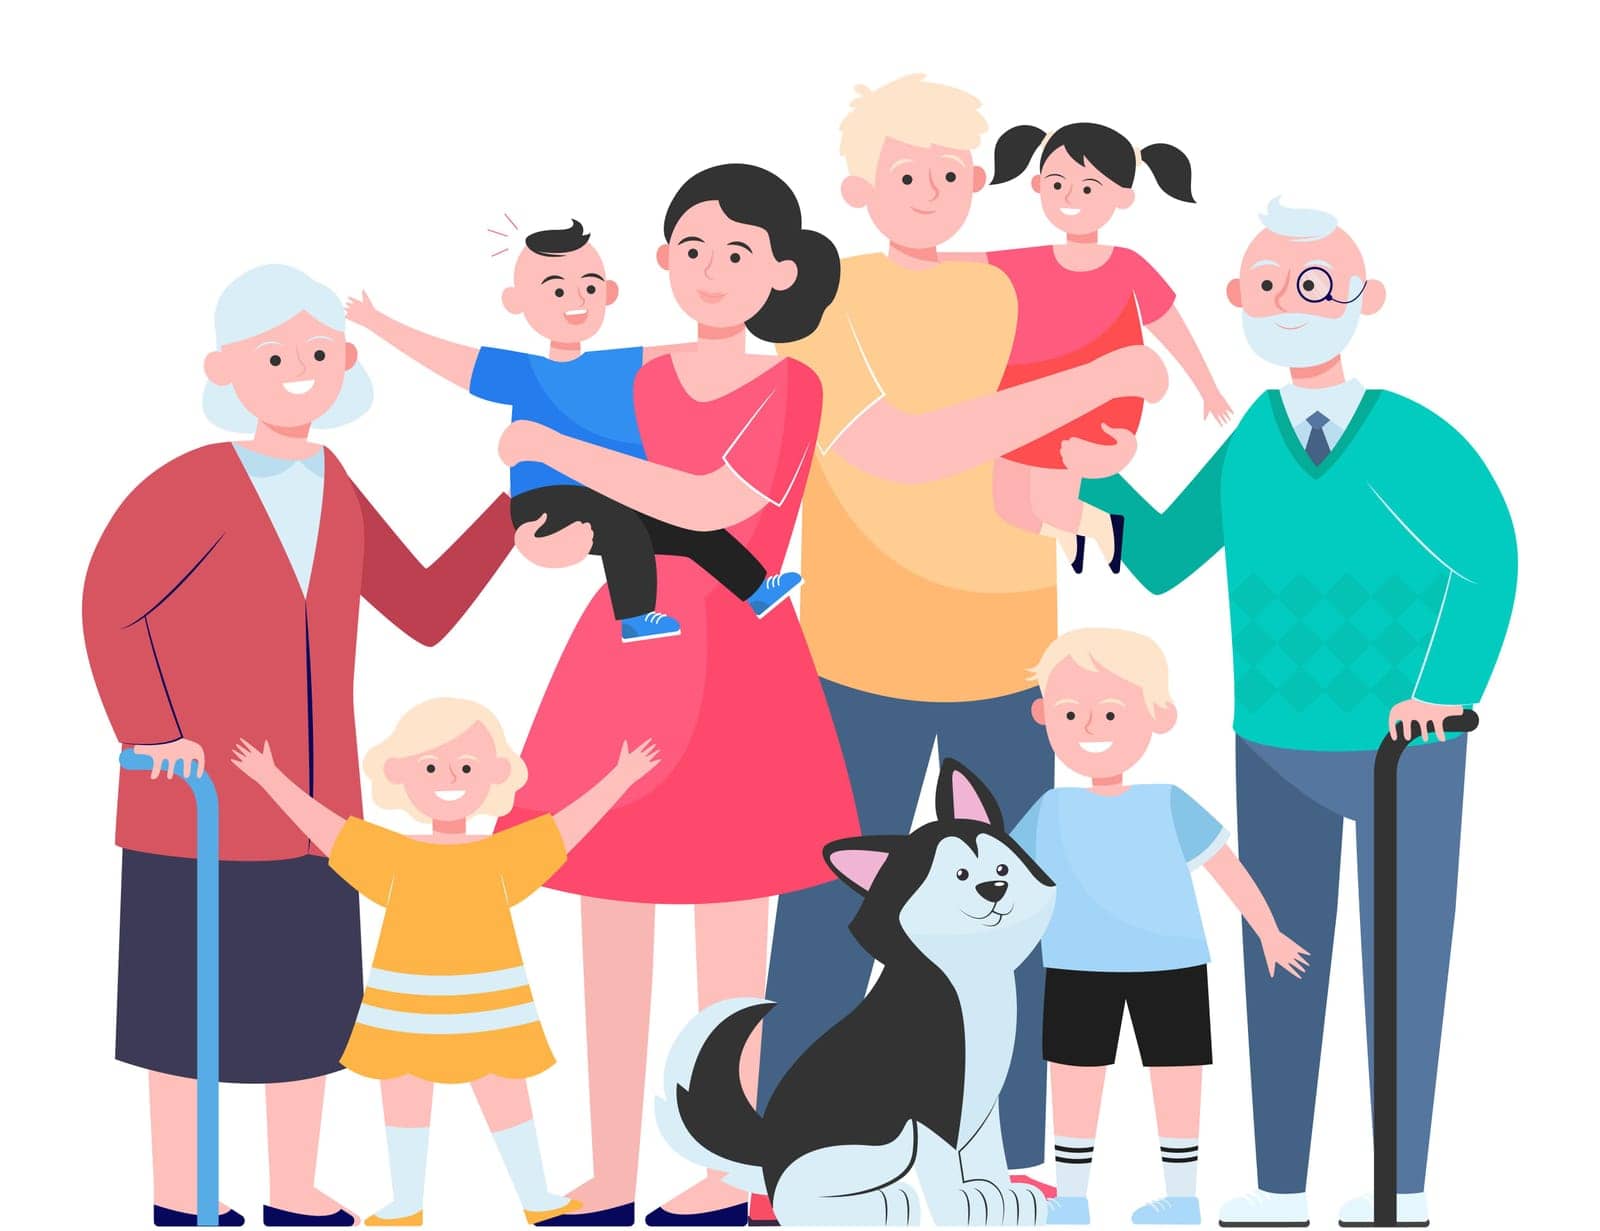 Big family concept by pchvector